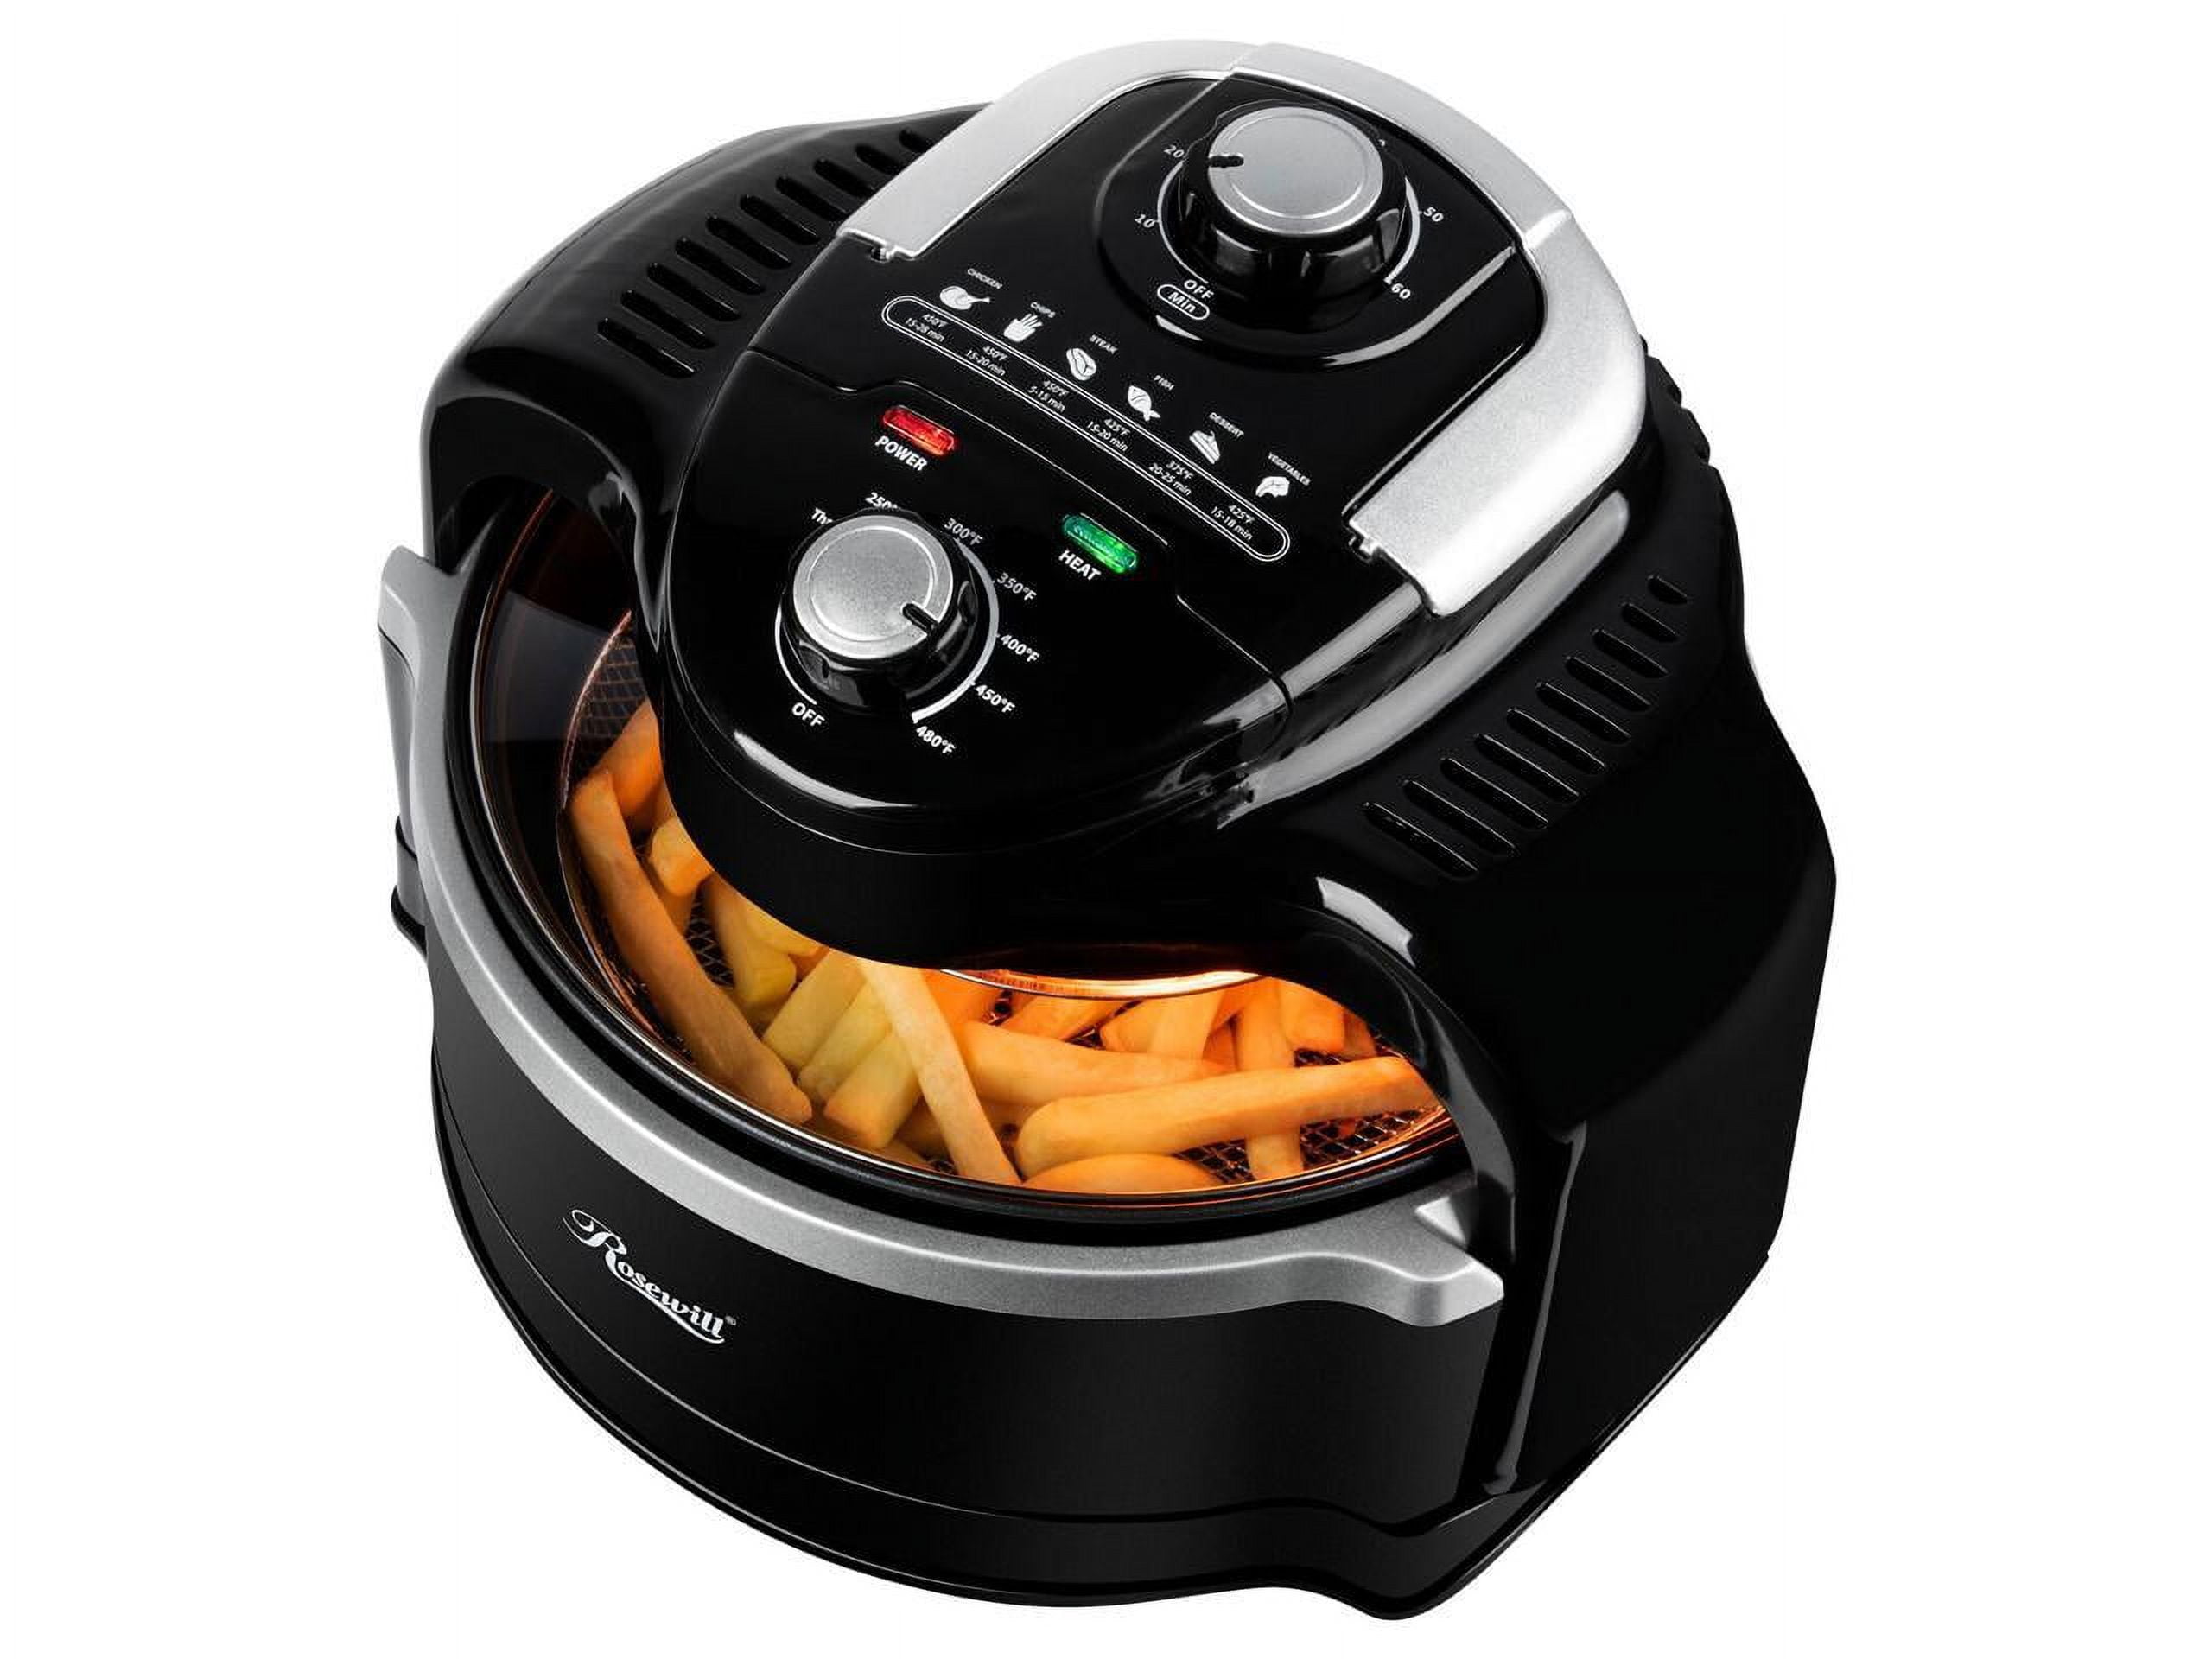 Air Fryers US plug 110V air fryer 4L household electric fryer airfryer oven  airfryers accesoires Oil-free air fryers 220V 700W